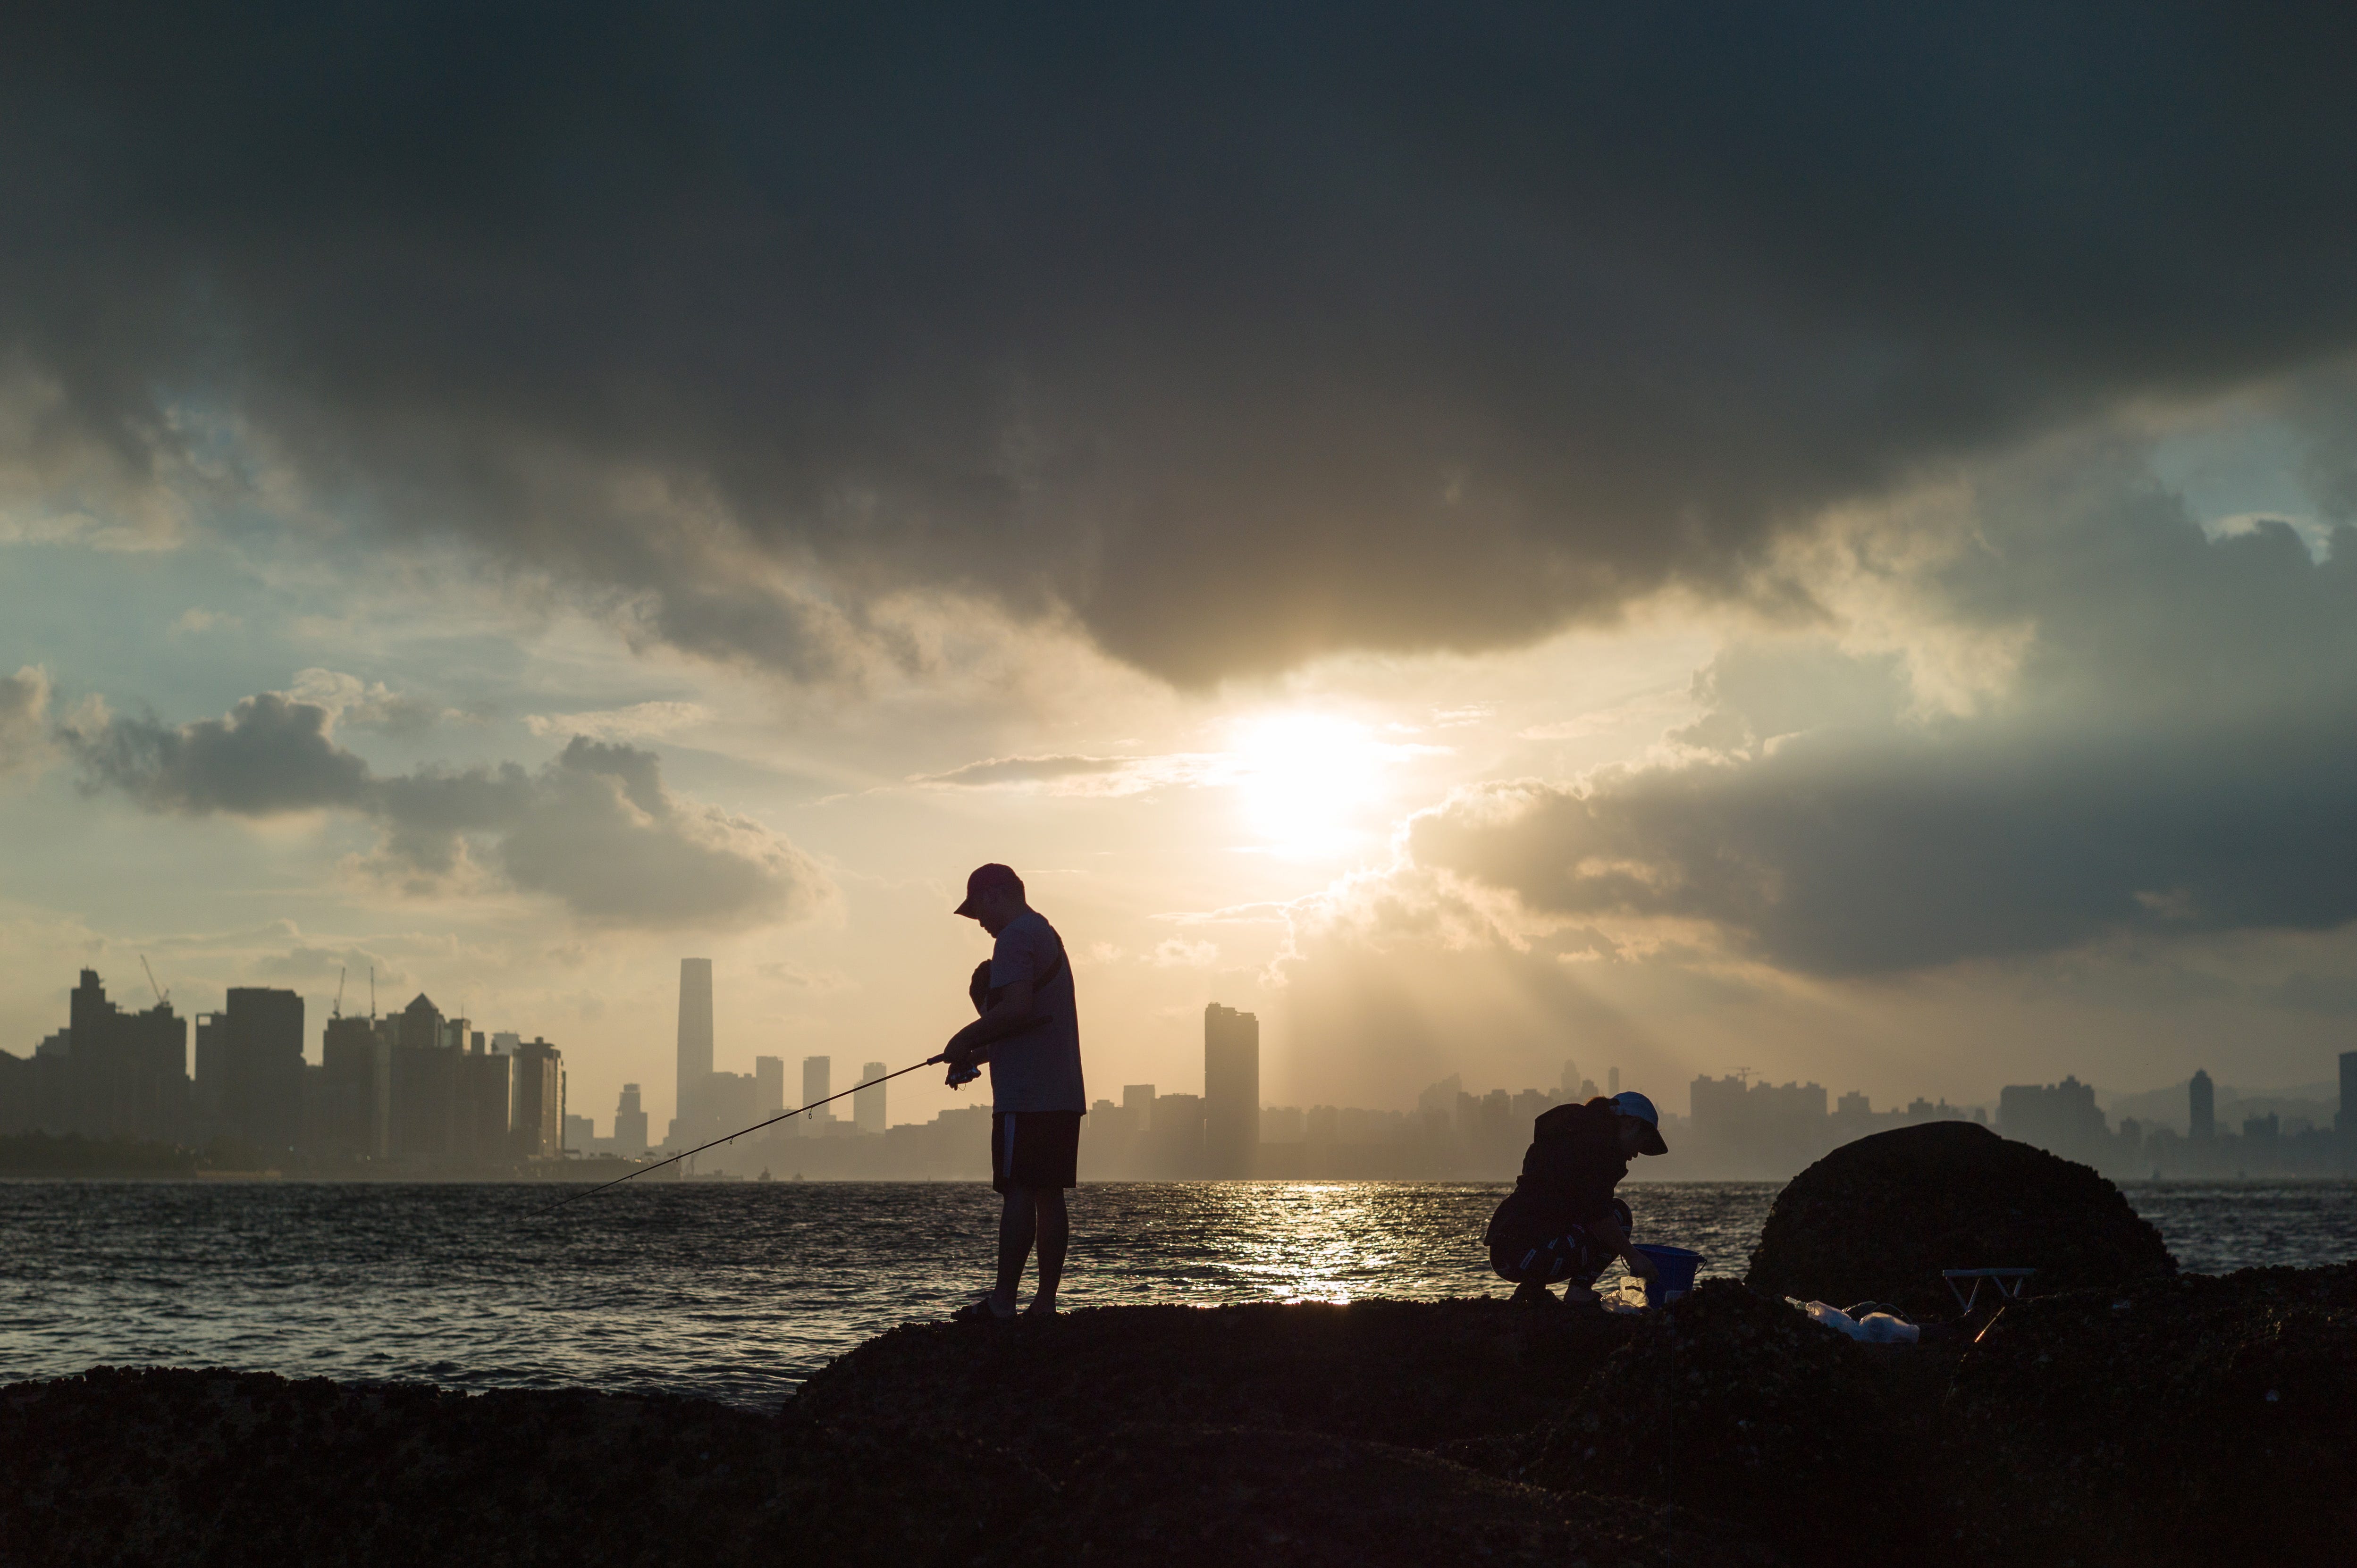 A man fishes as the sun sets over Victoria Harbor from the shoreline Lei Yu Mun in Hong Kong, China.